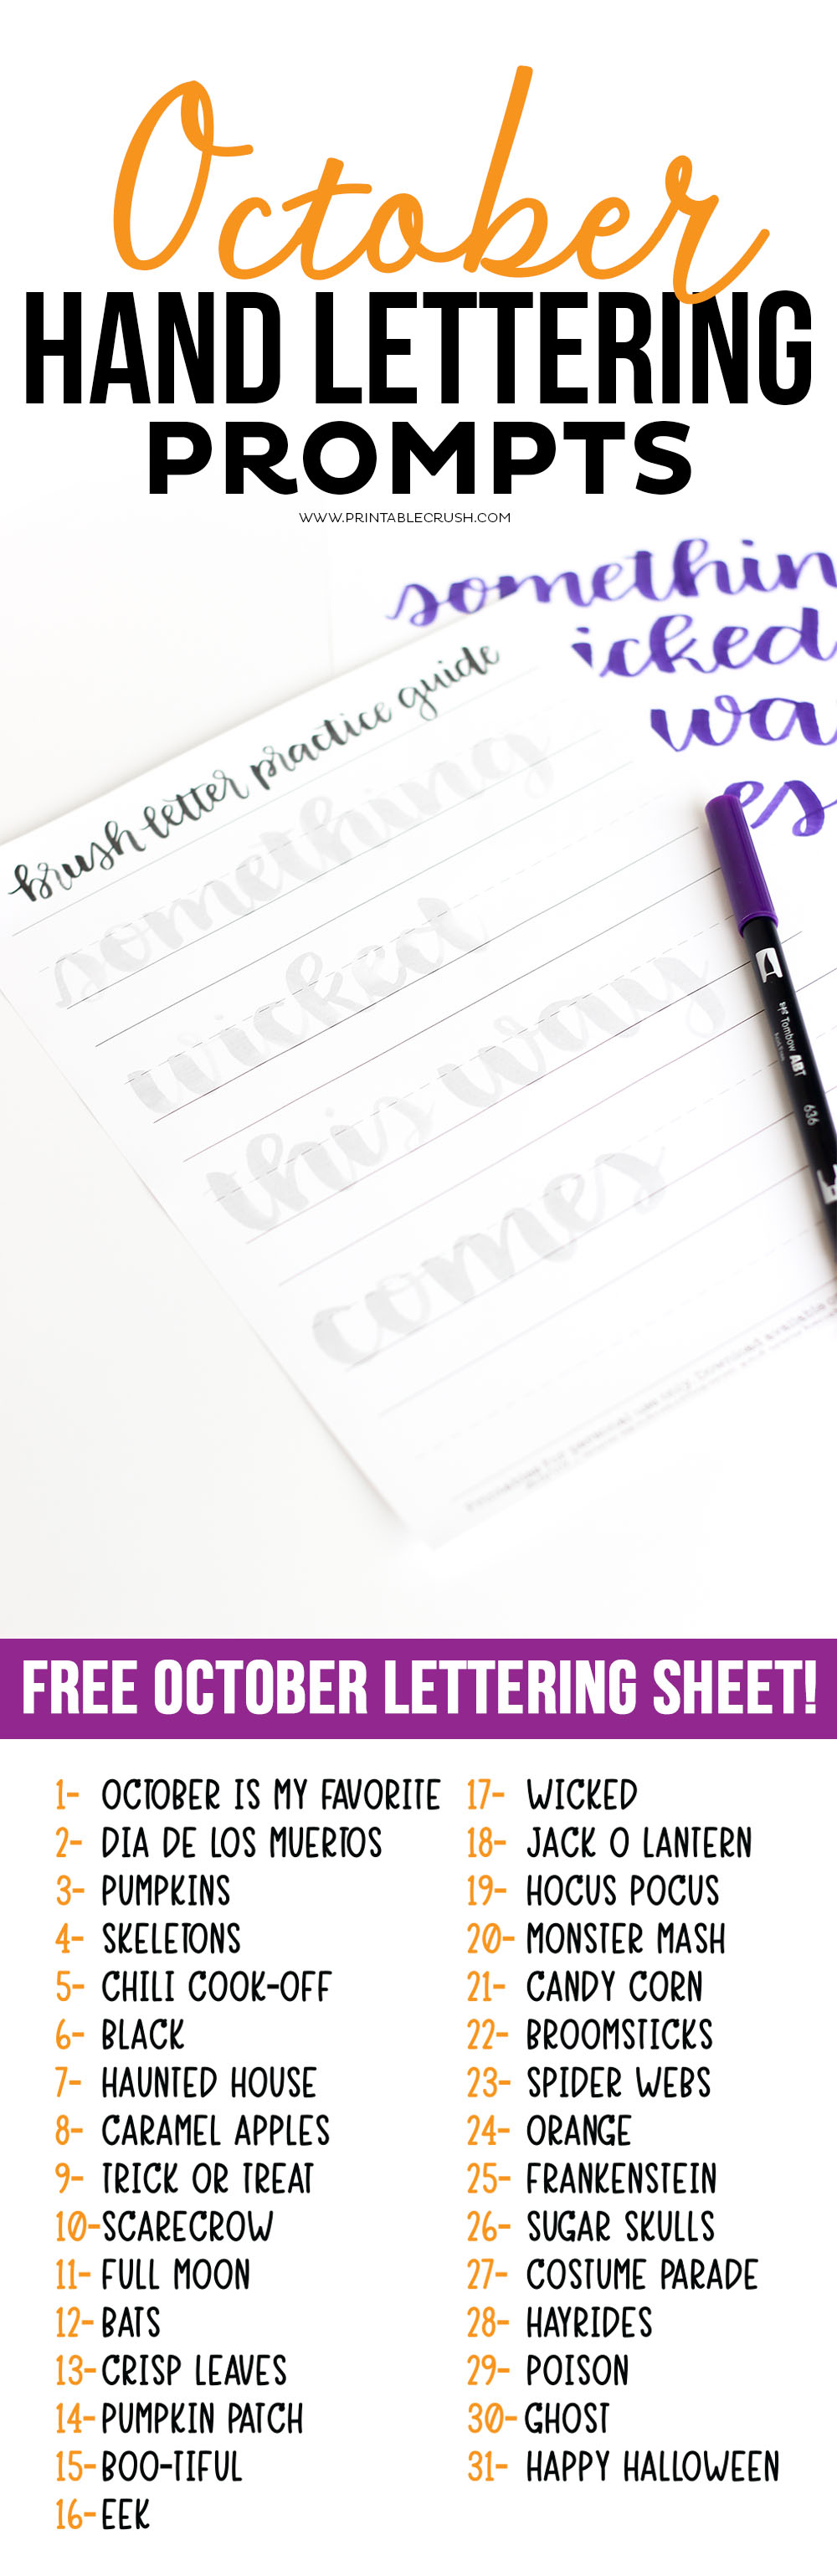 OCTOBER HAND LETTERING PROMPTS - Printable Crush